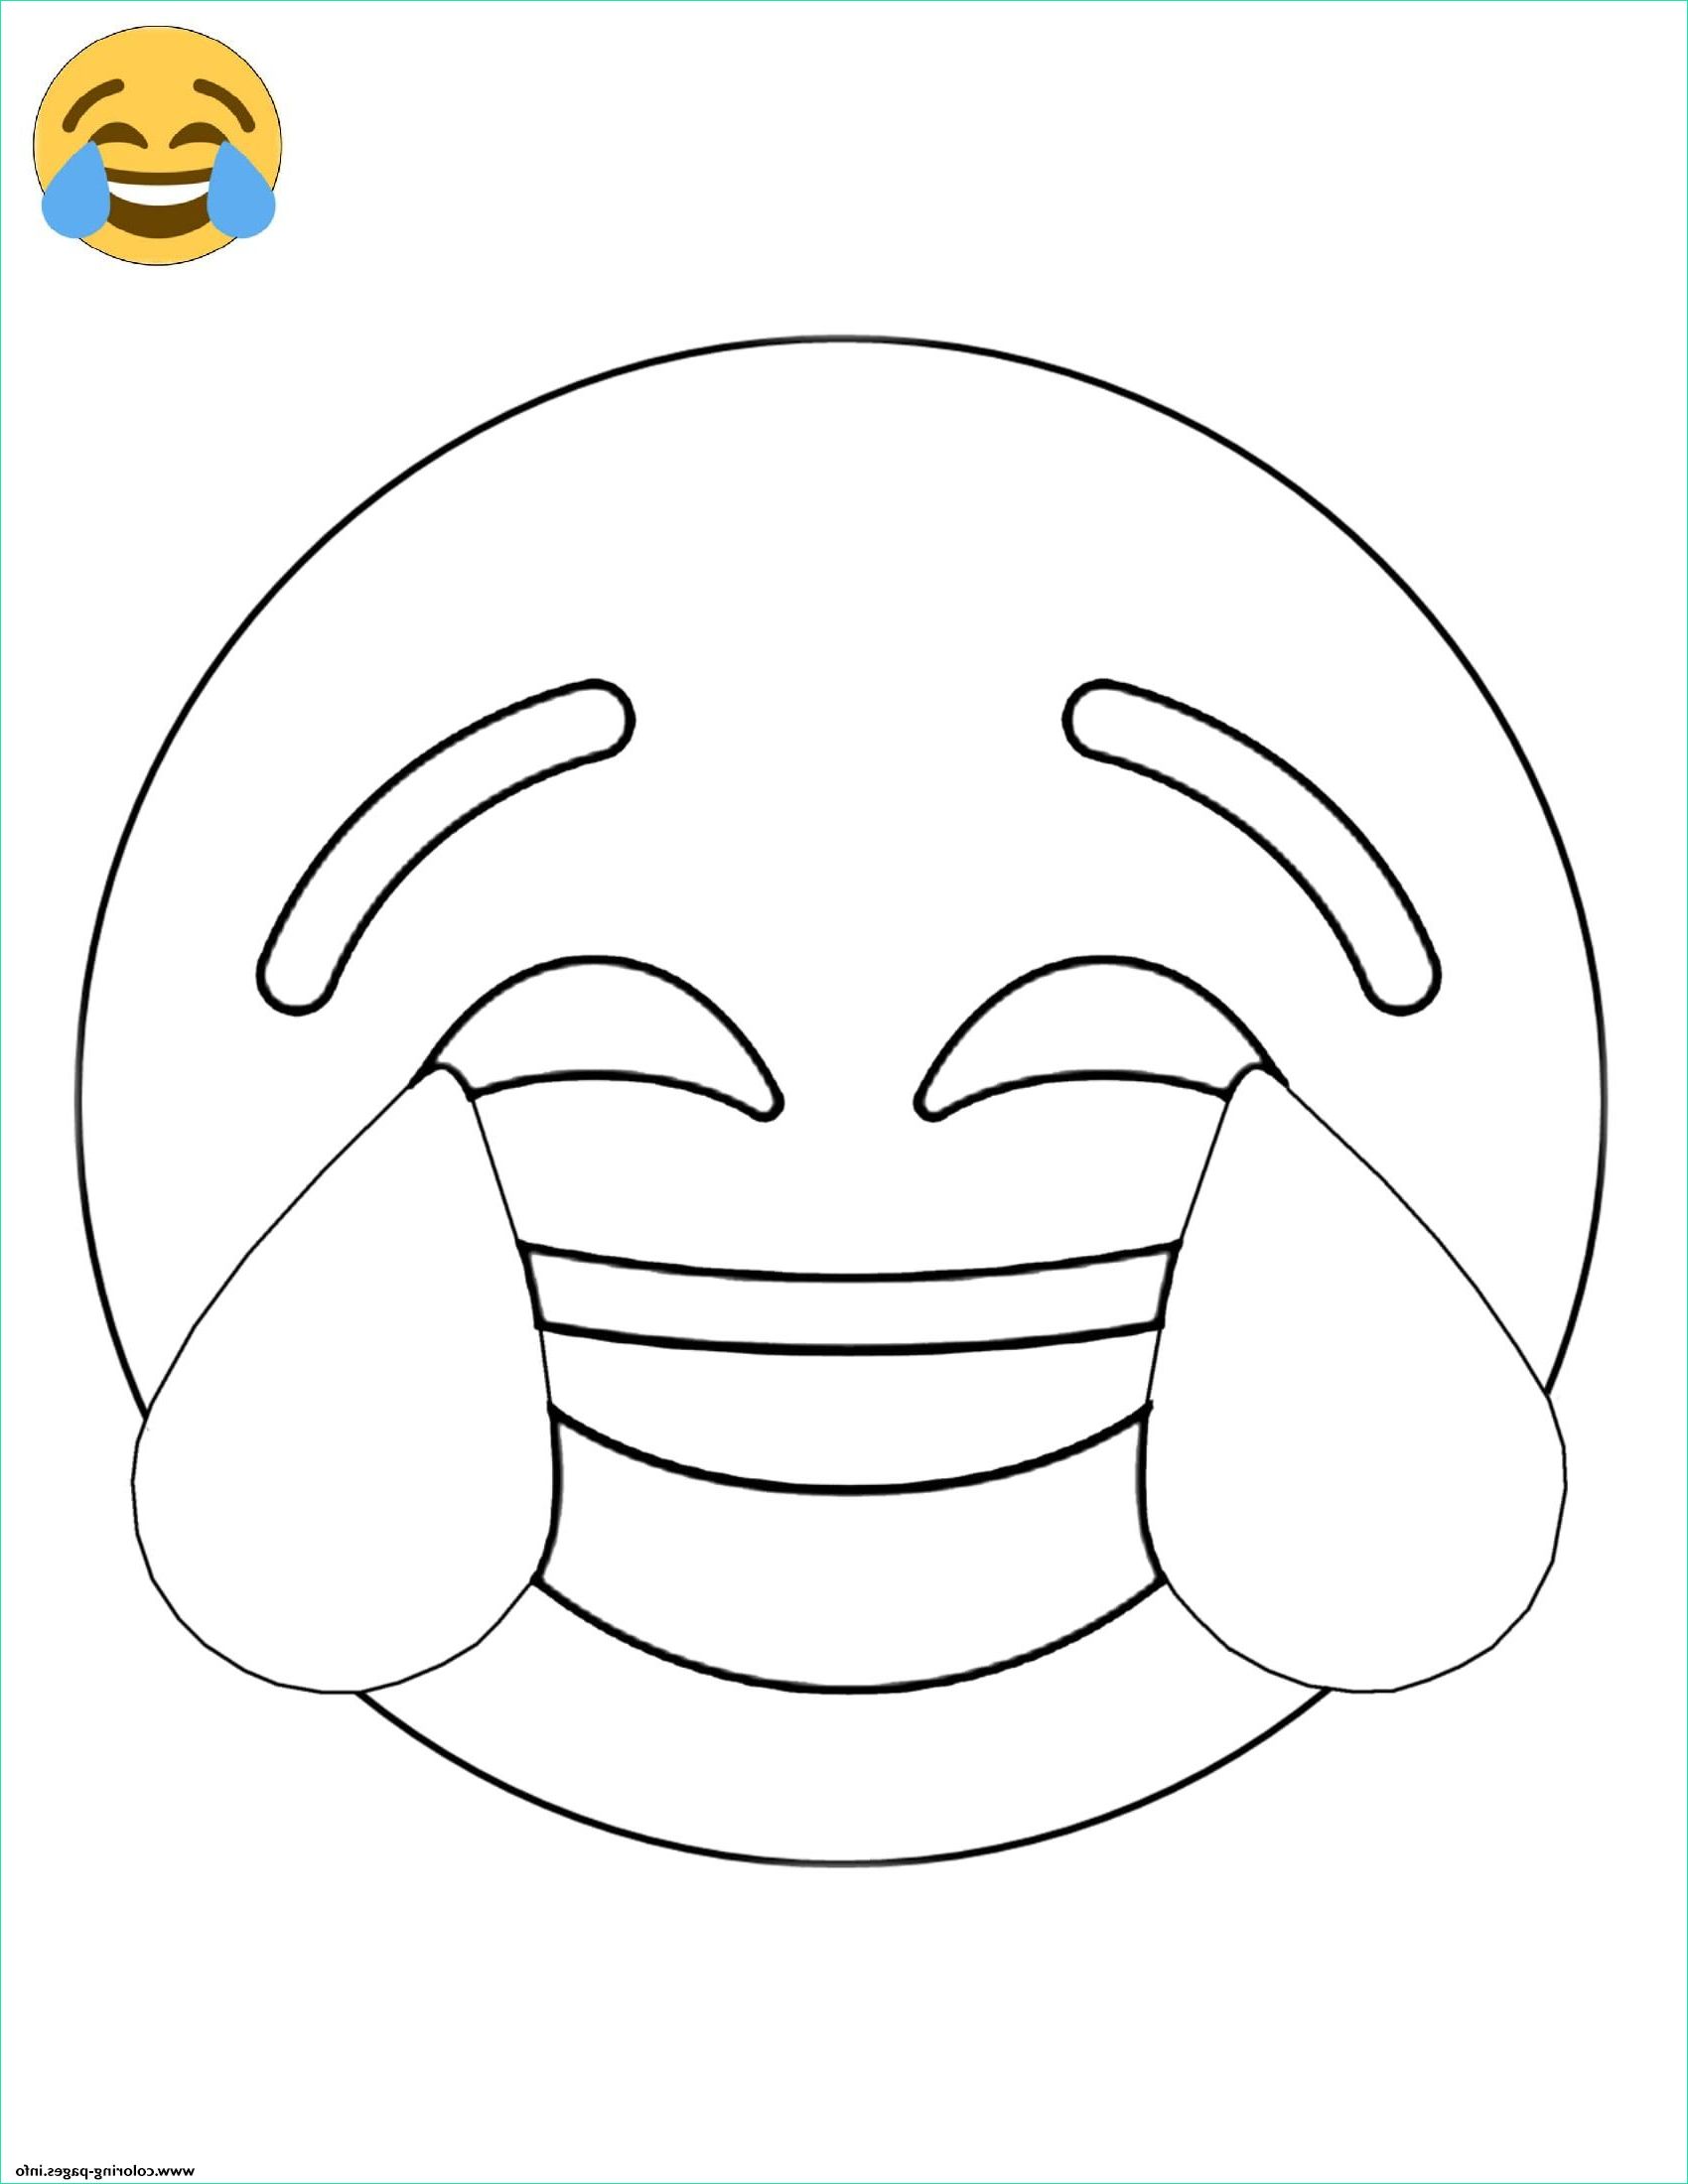 Dessin A Imprimer Smiley Luxe Photos Twitter Crying Laughing Emoji Coloring Pages Printable